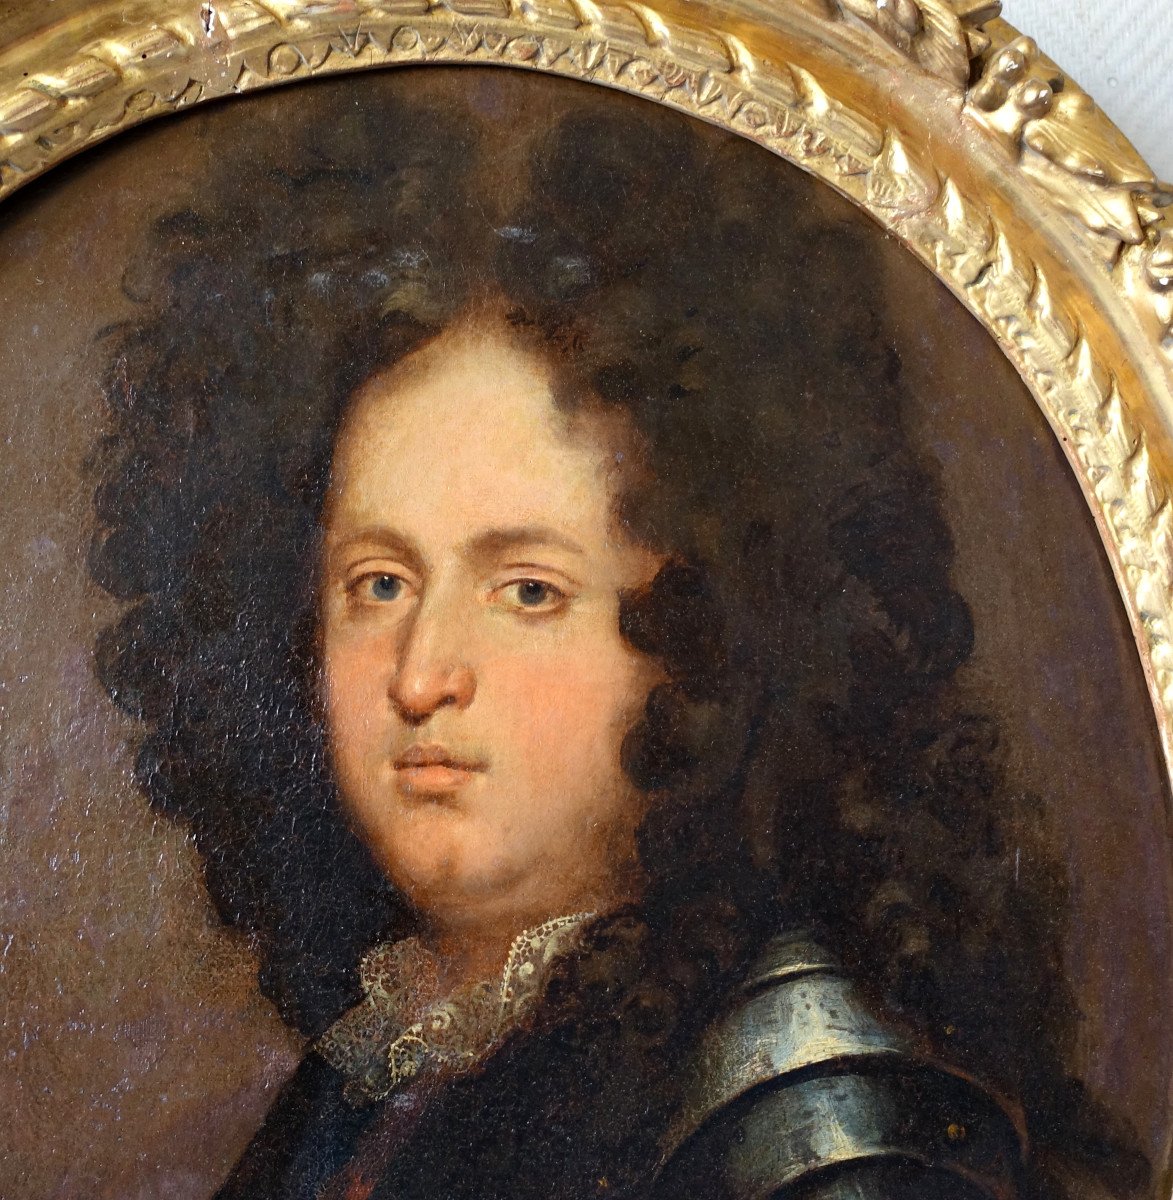 French School From The 17th Century, Portrait Of An Aristocrat Officer In Louis XIV Period Armor-photo-3